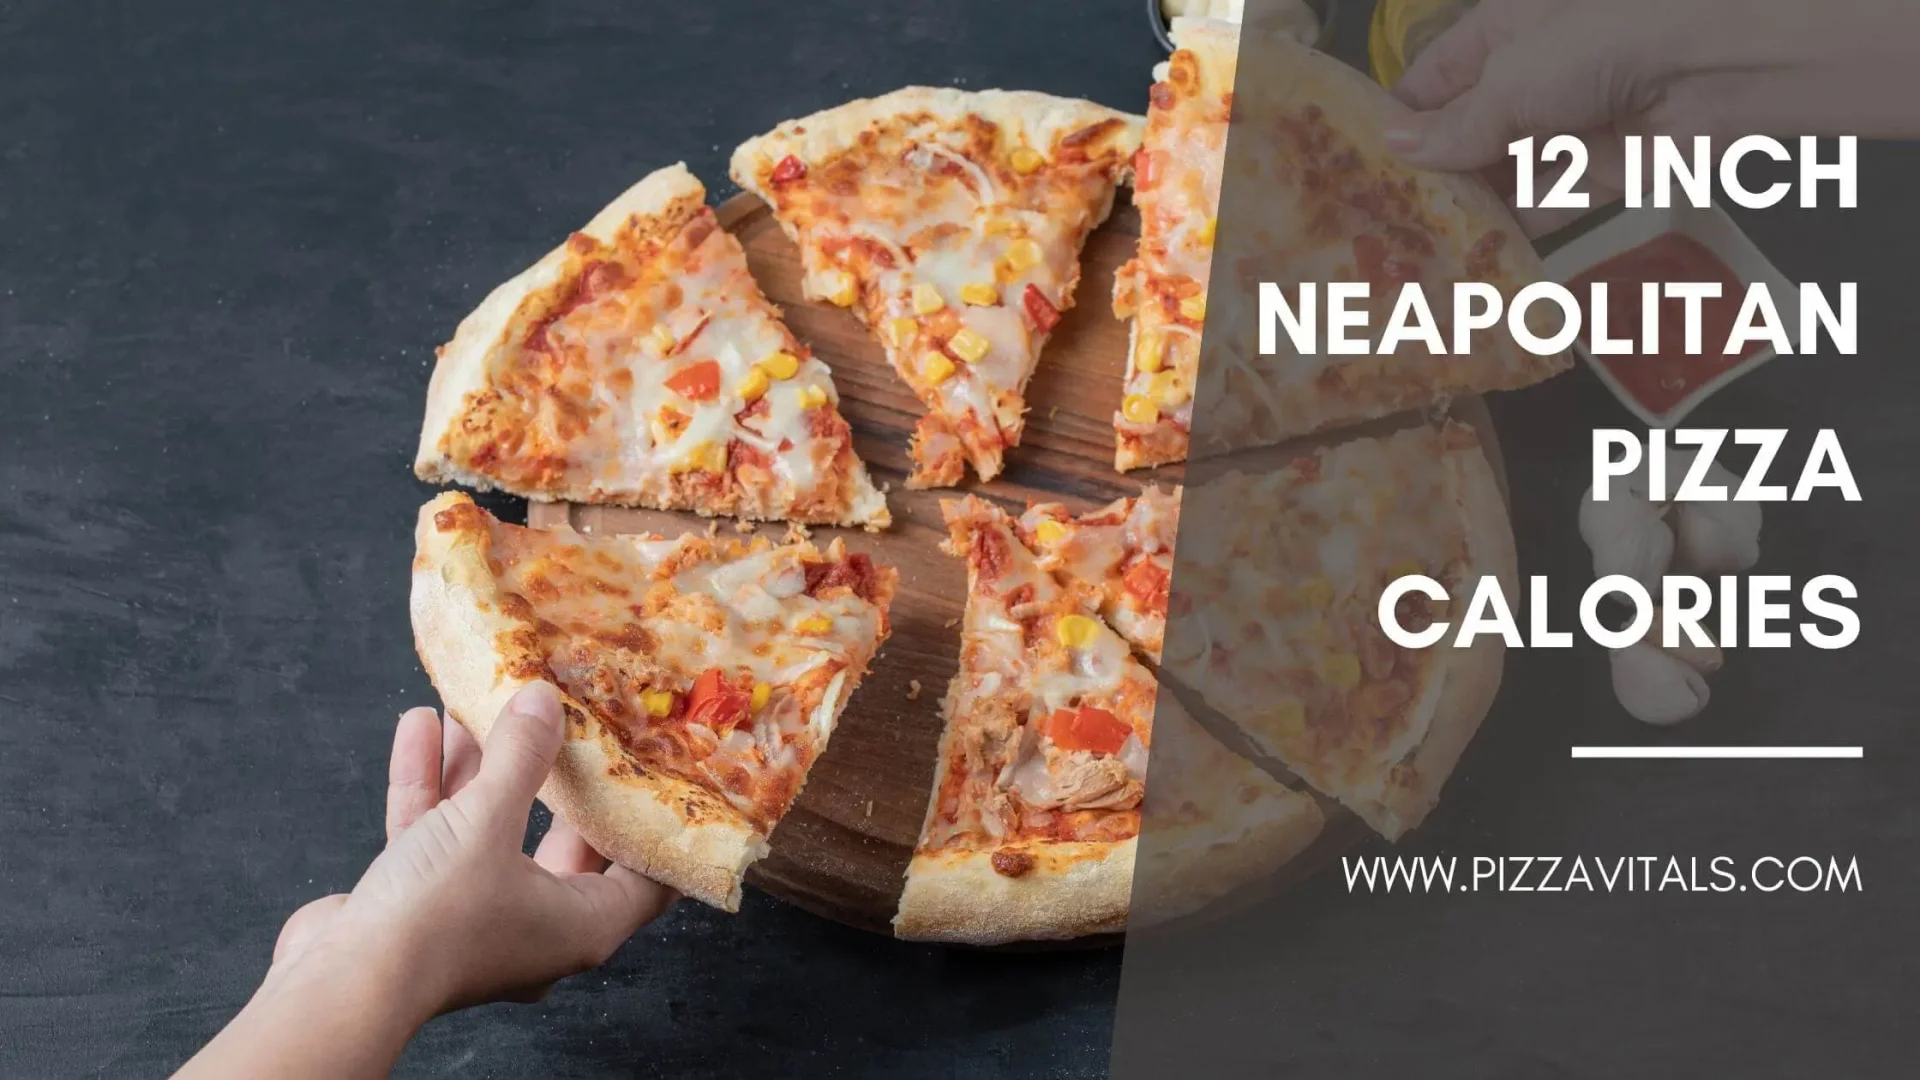 12 Inch Neapolitan Pizza Calories | Healthy Meal Options